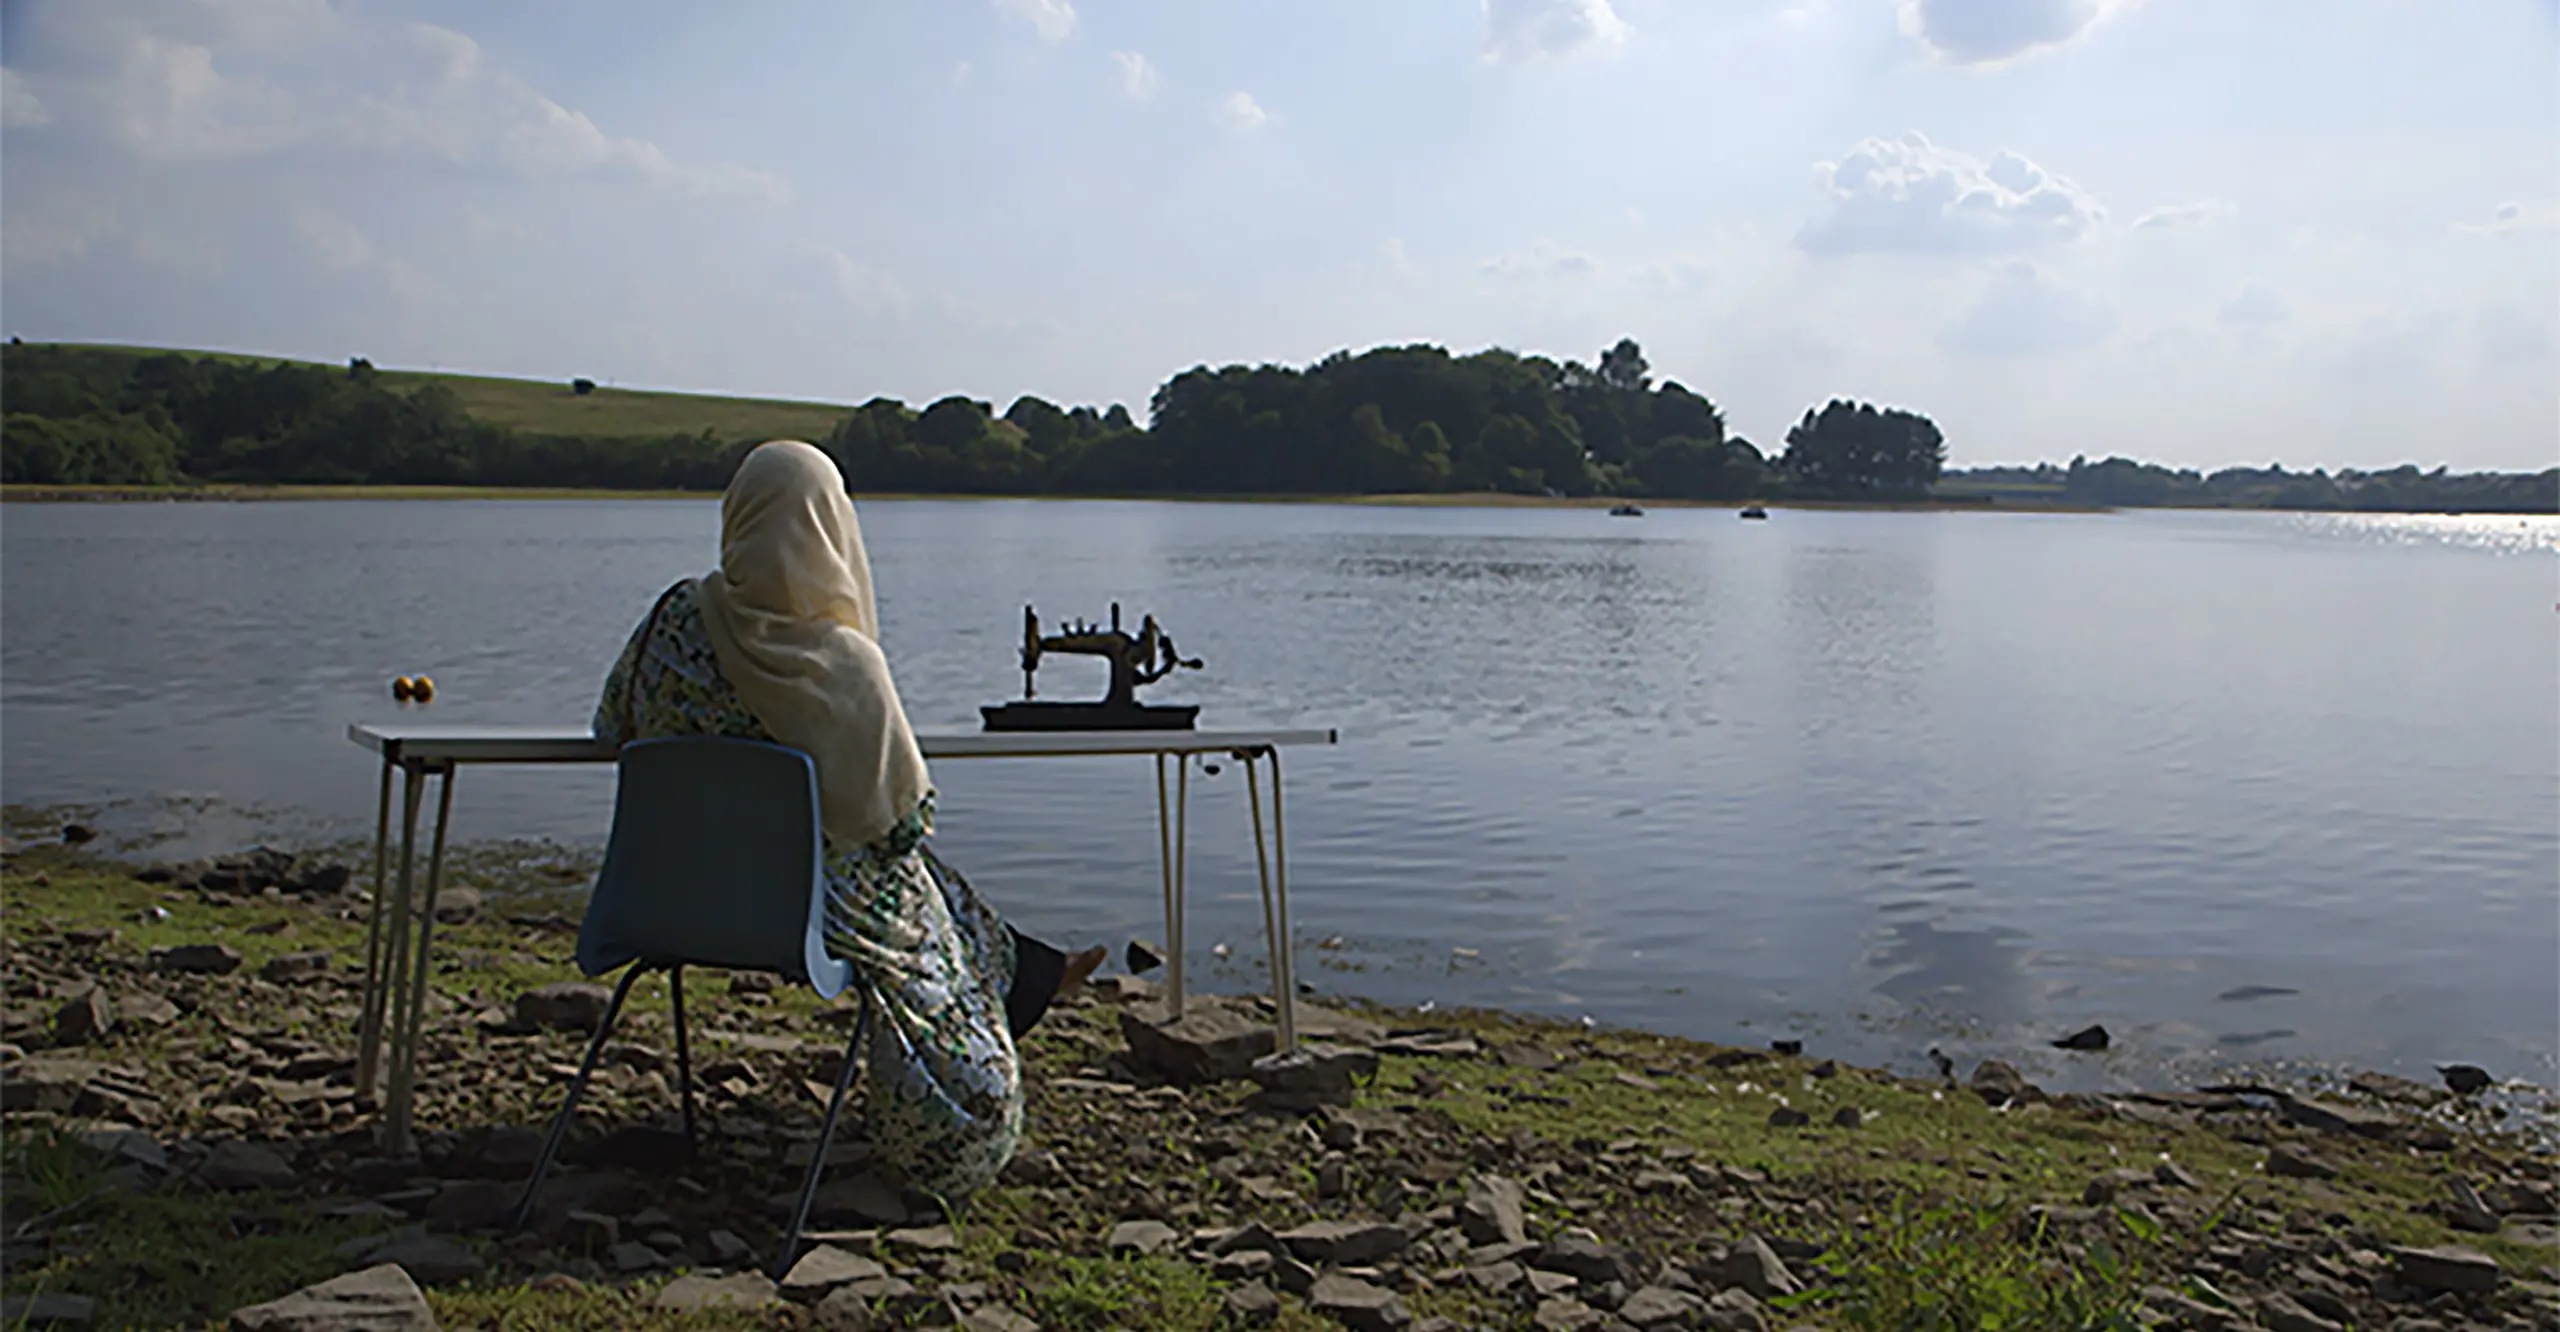 A woman sits overlooking a lake with a sewing machine